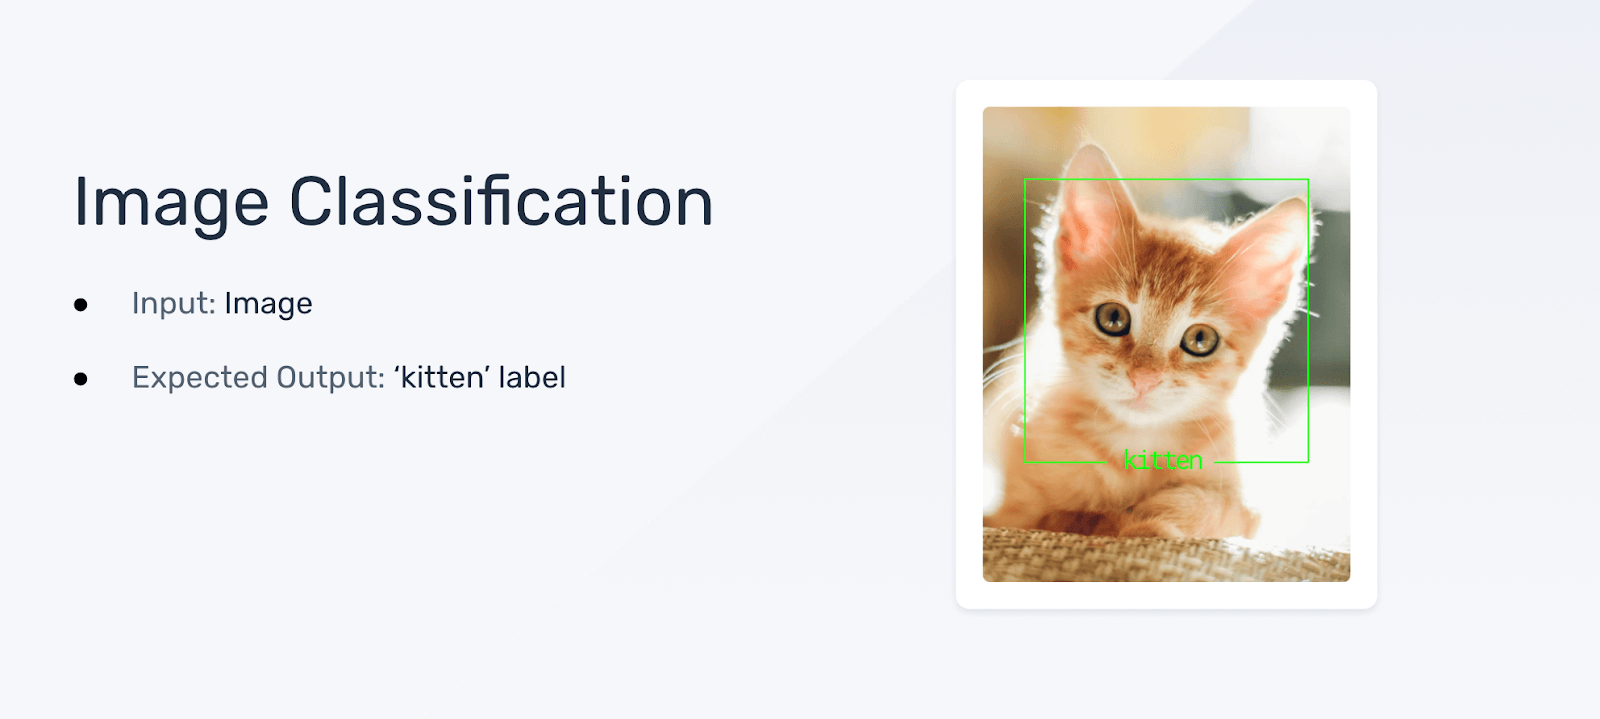 An image of a kitten as the input, and the label 'kitten' as the expected output.